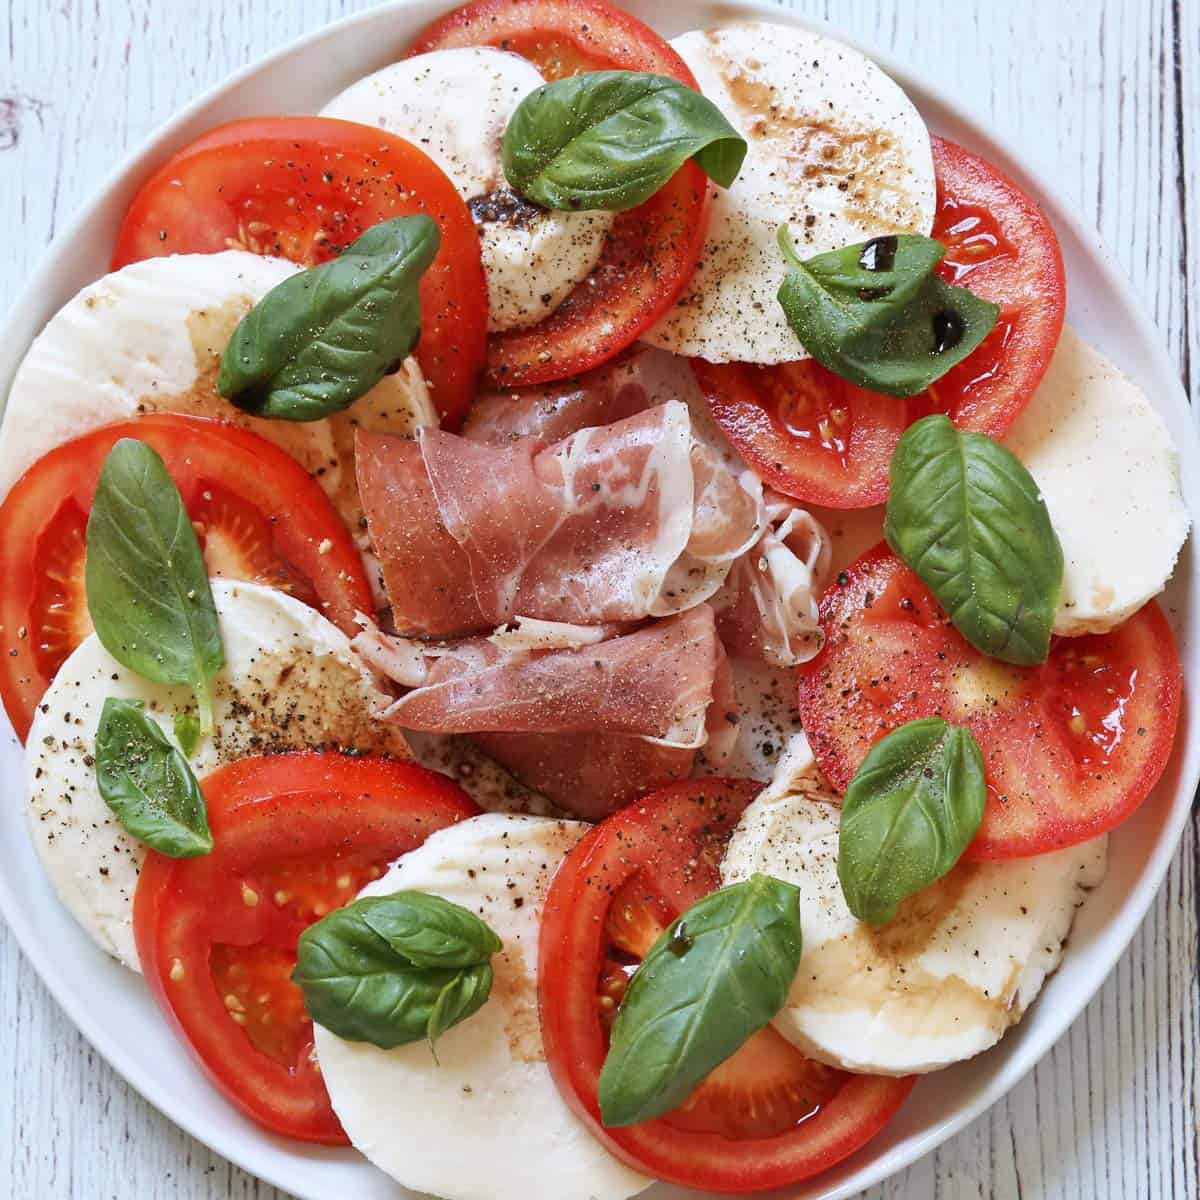 Caprese salad is served with prosciutto.